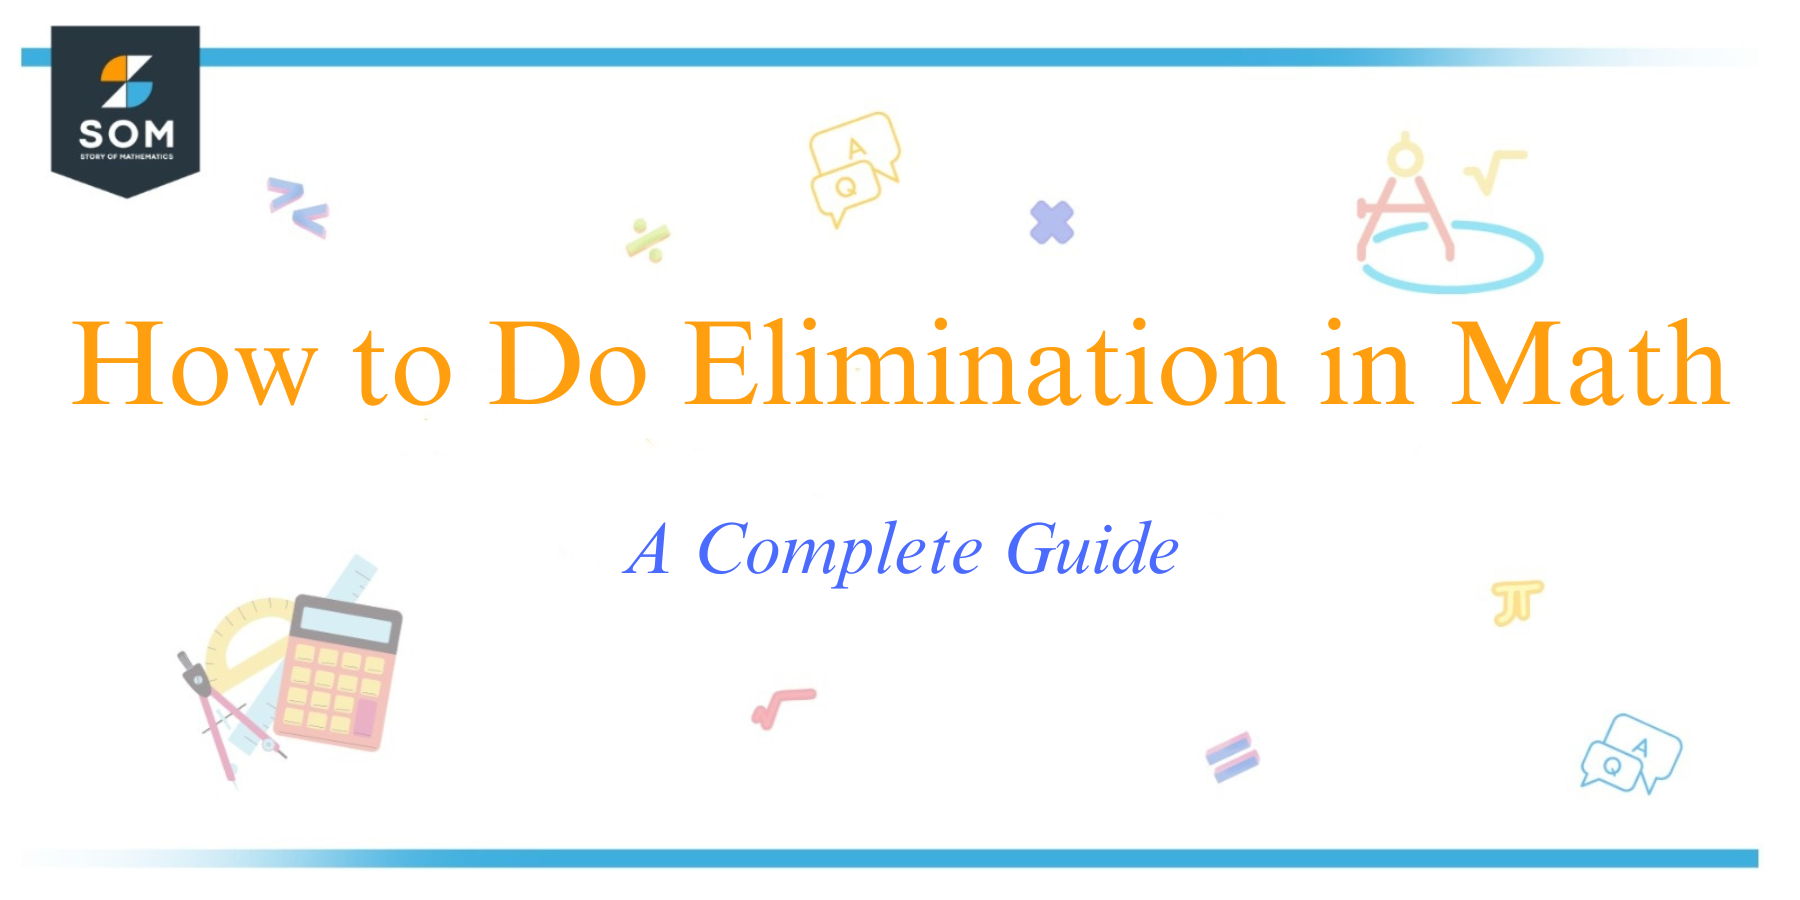 How-to-Do-Elimination-in-Math-A-Complete-Guide